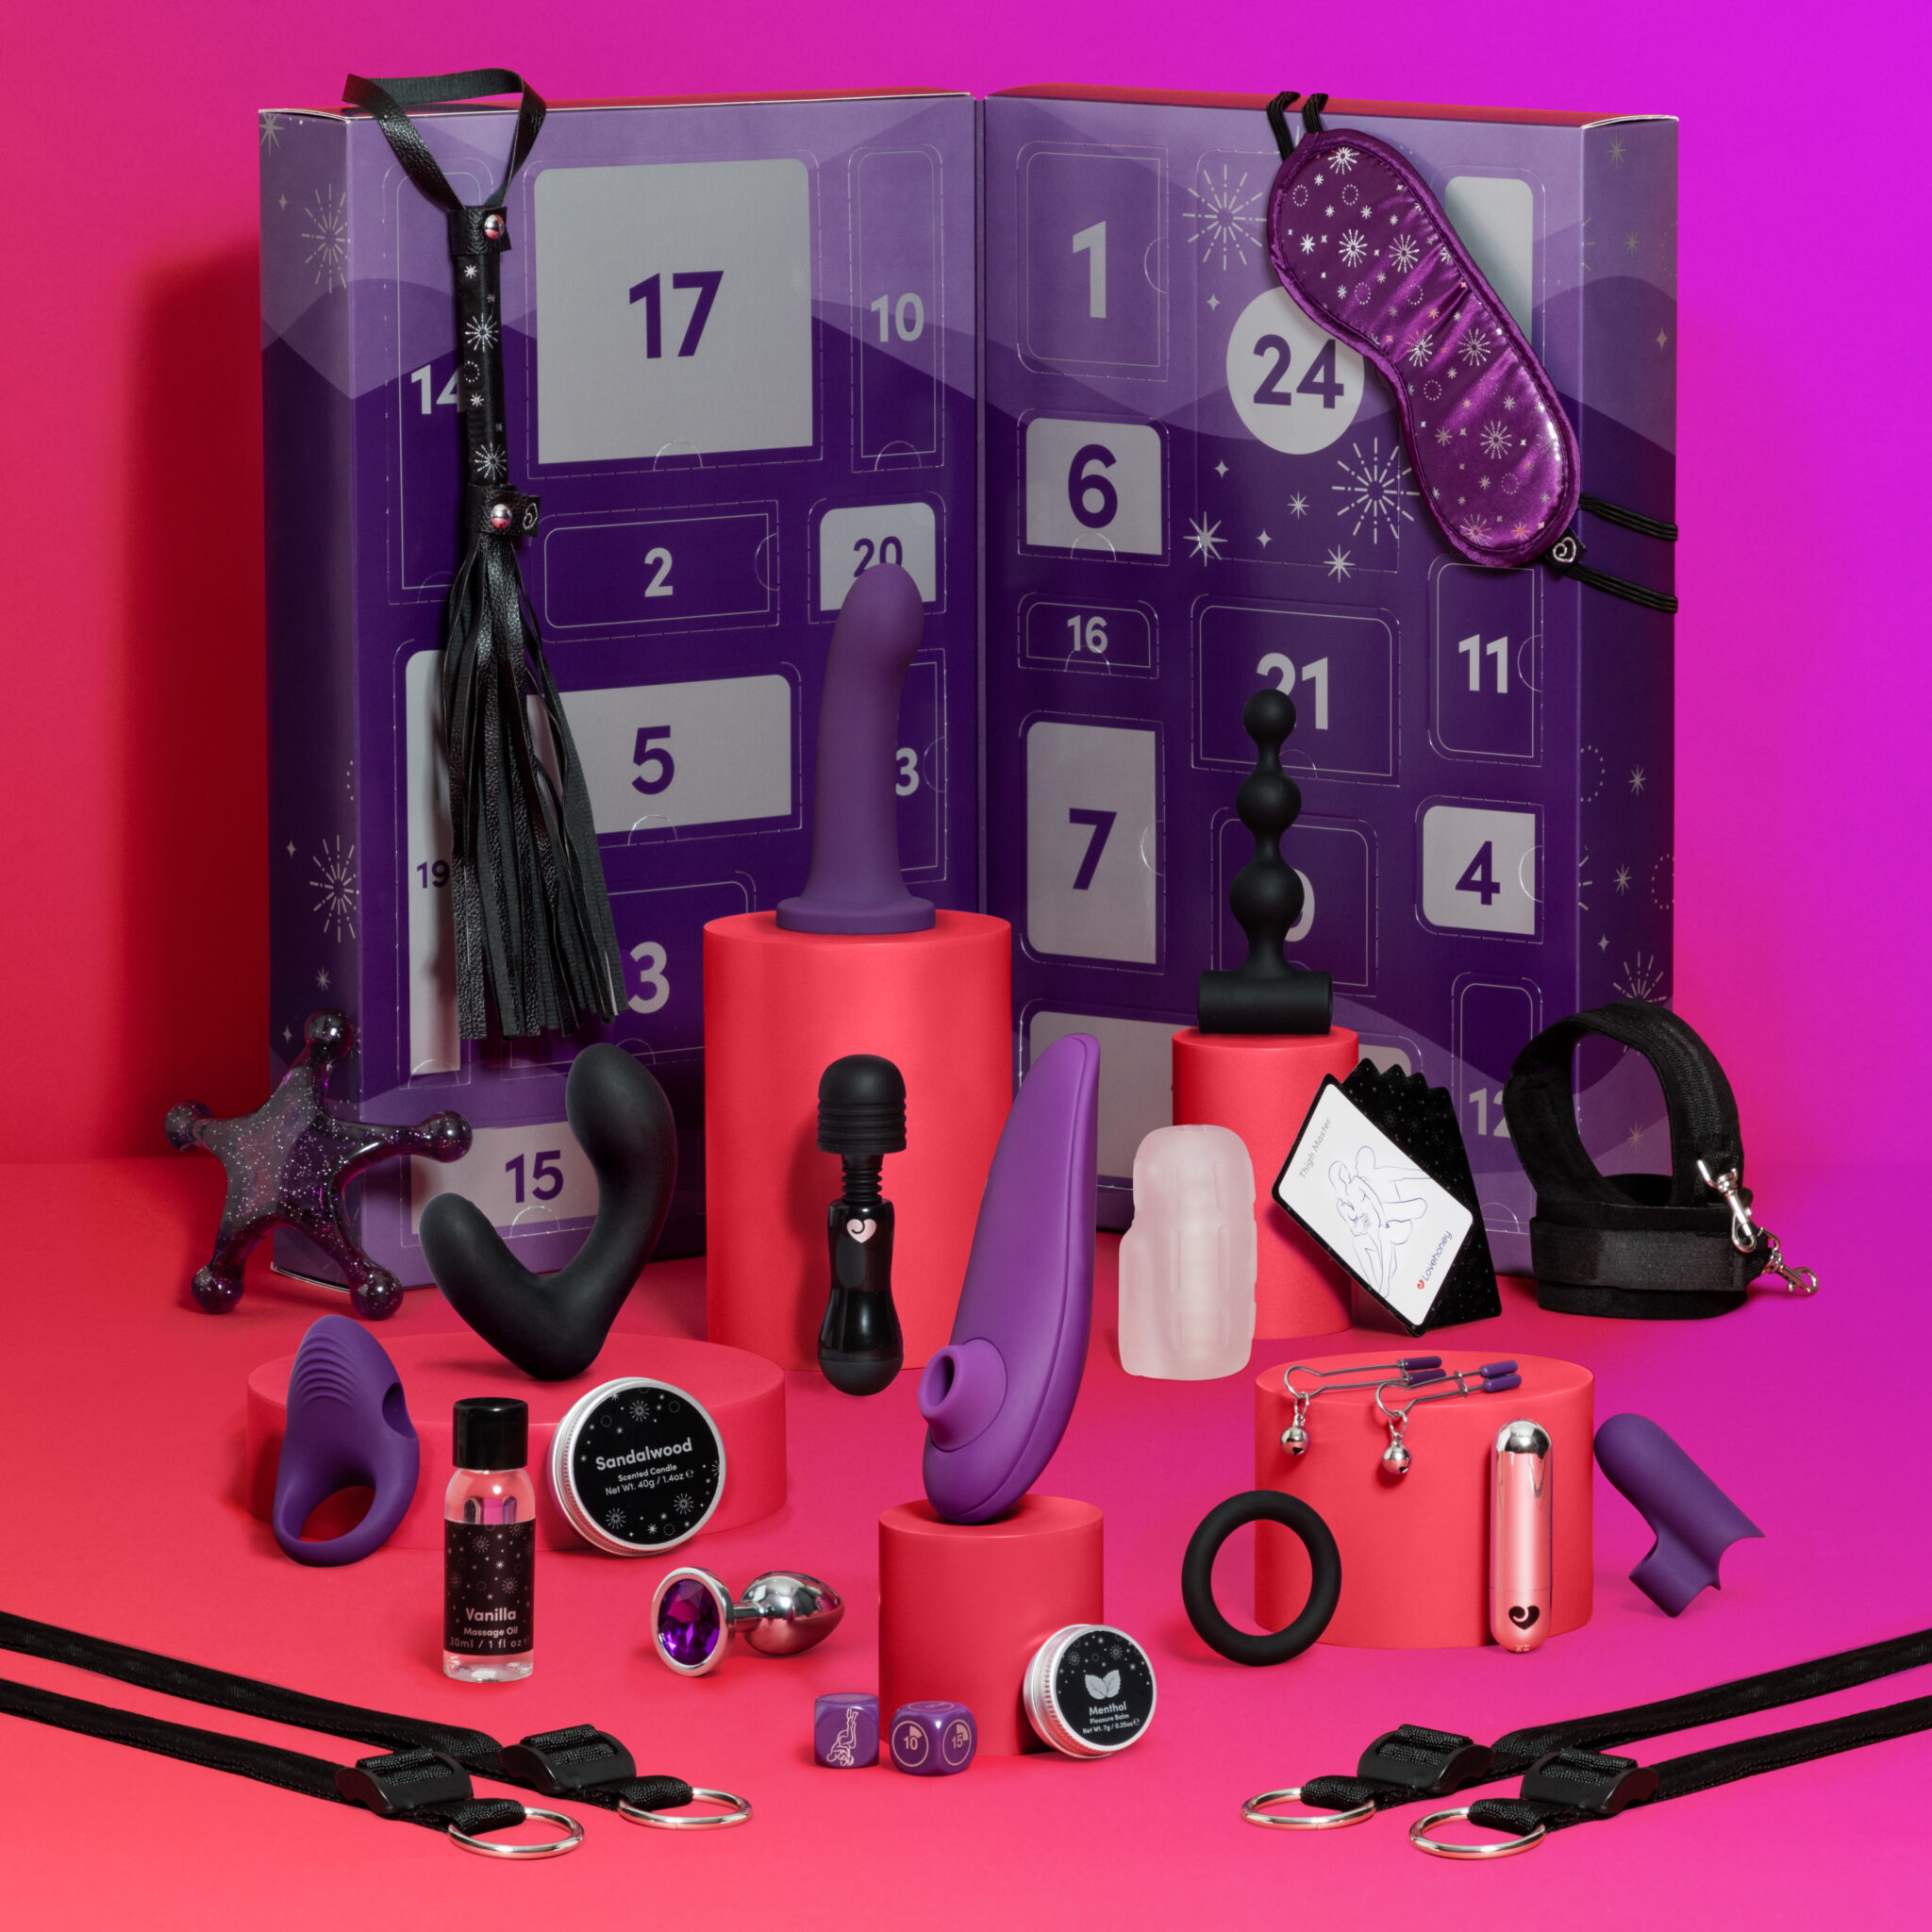 A full image of the Lovehoney X Womanizer advent calendar with its variety of sex toys and pleasure tools.